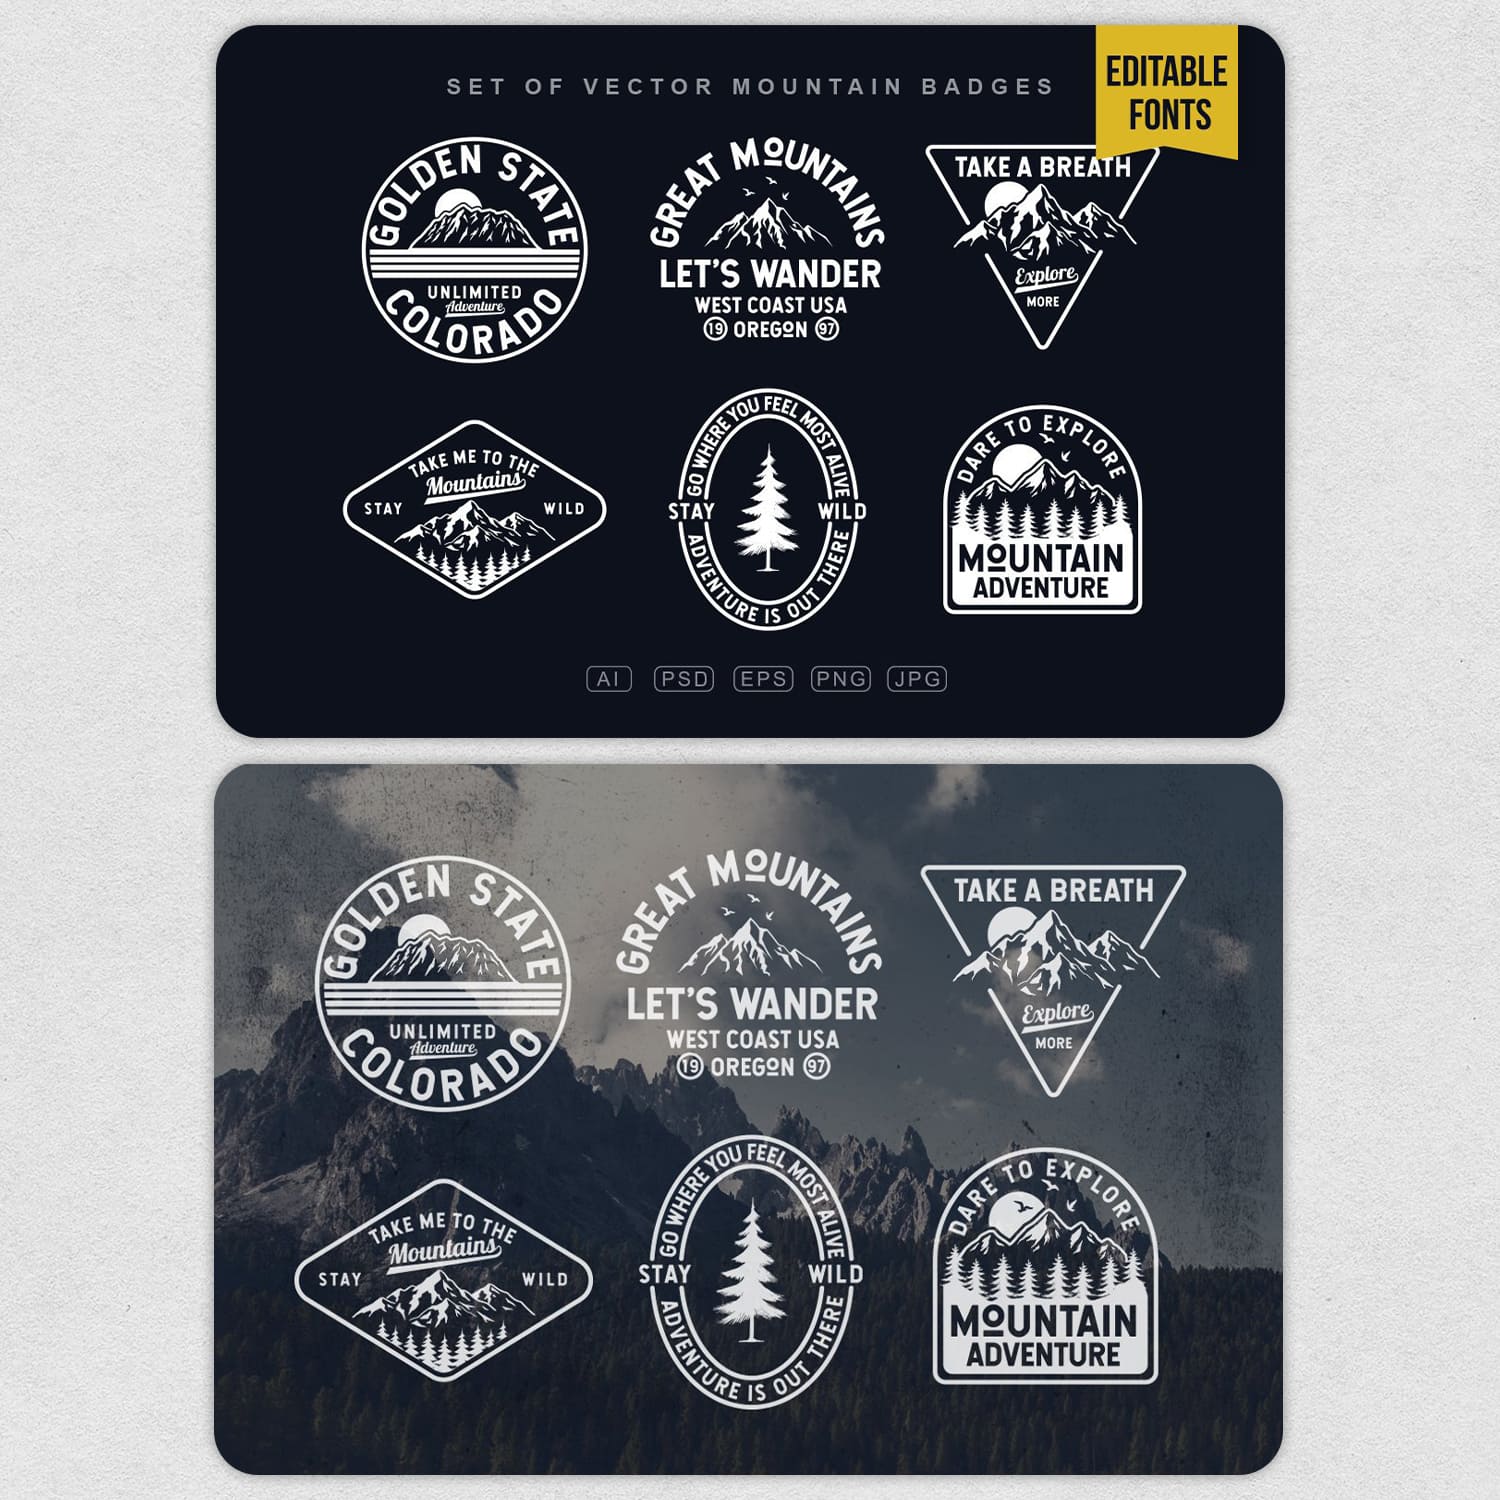 Vector Mountain Badges preview image.